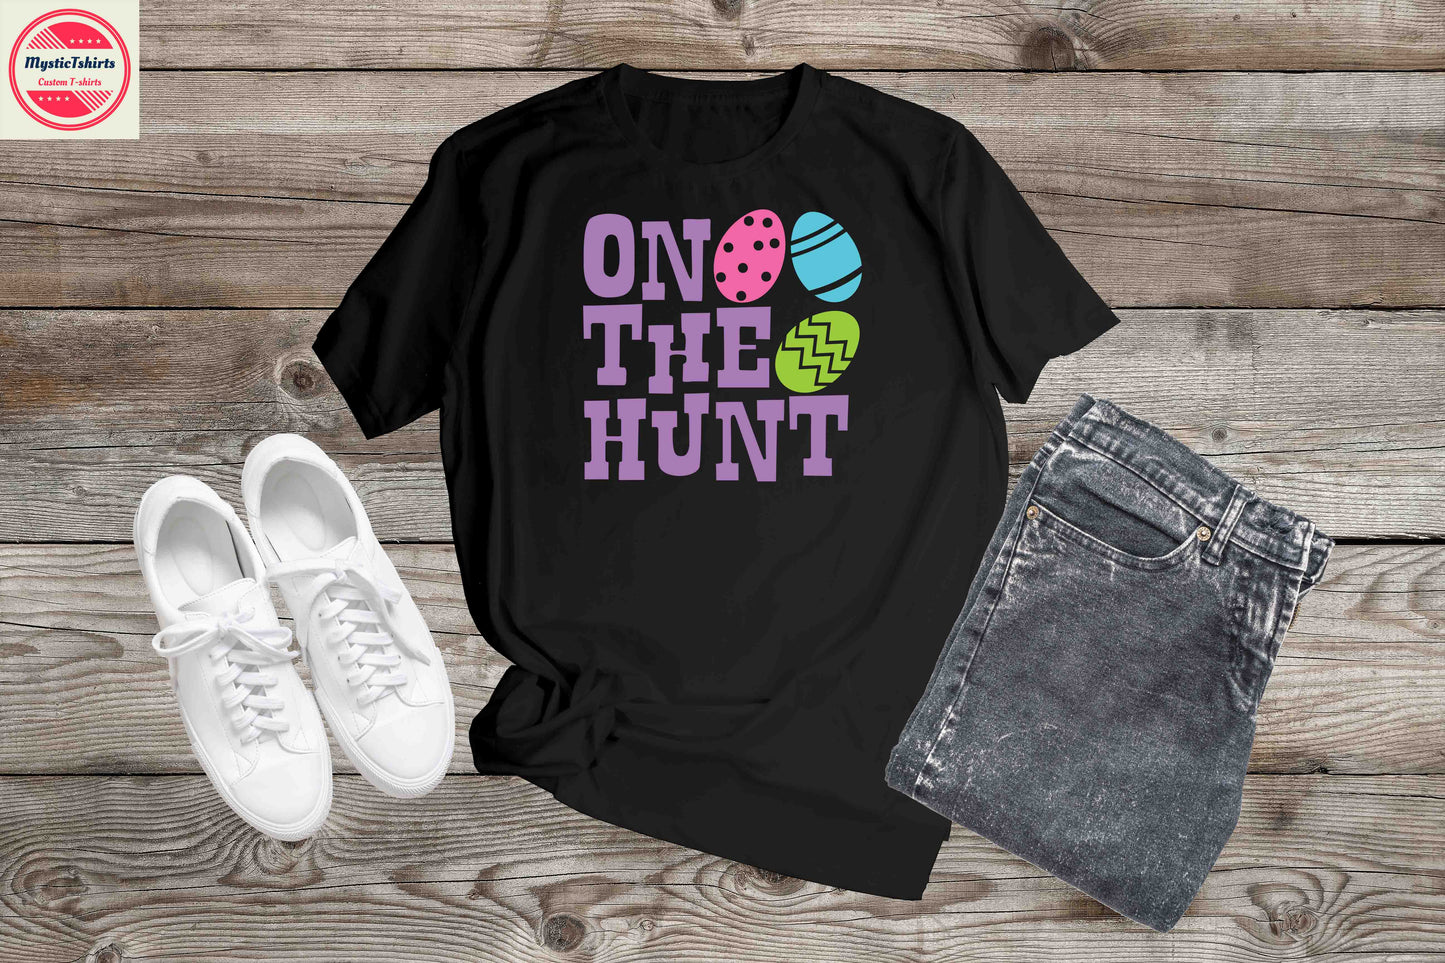 393. ON THE HUNT, Custom Made Shirt, Personalized T-Shirt, Custom Text, Make Your Own Shirt, Custom Tee